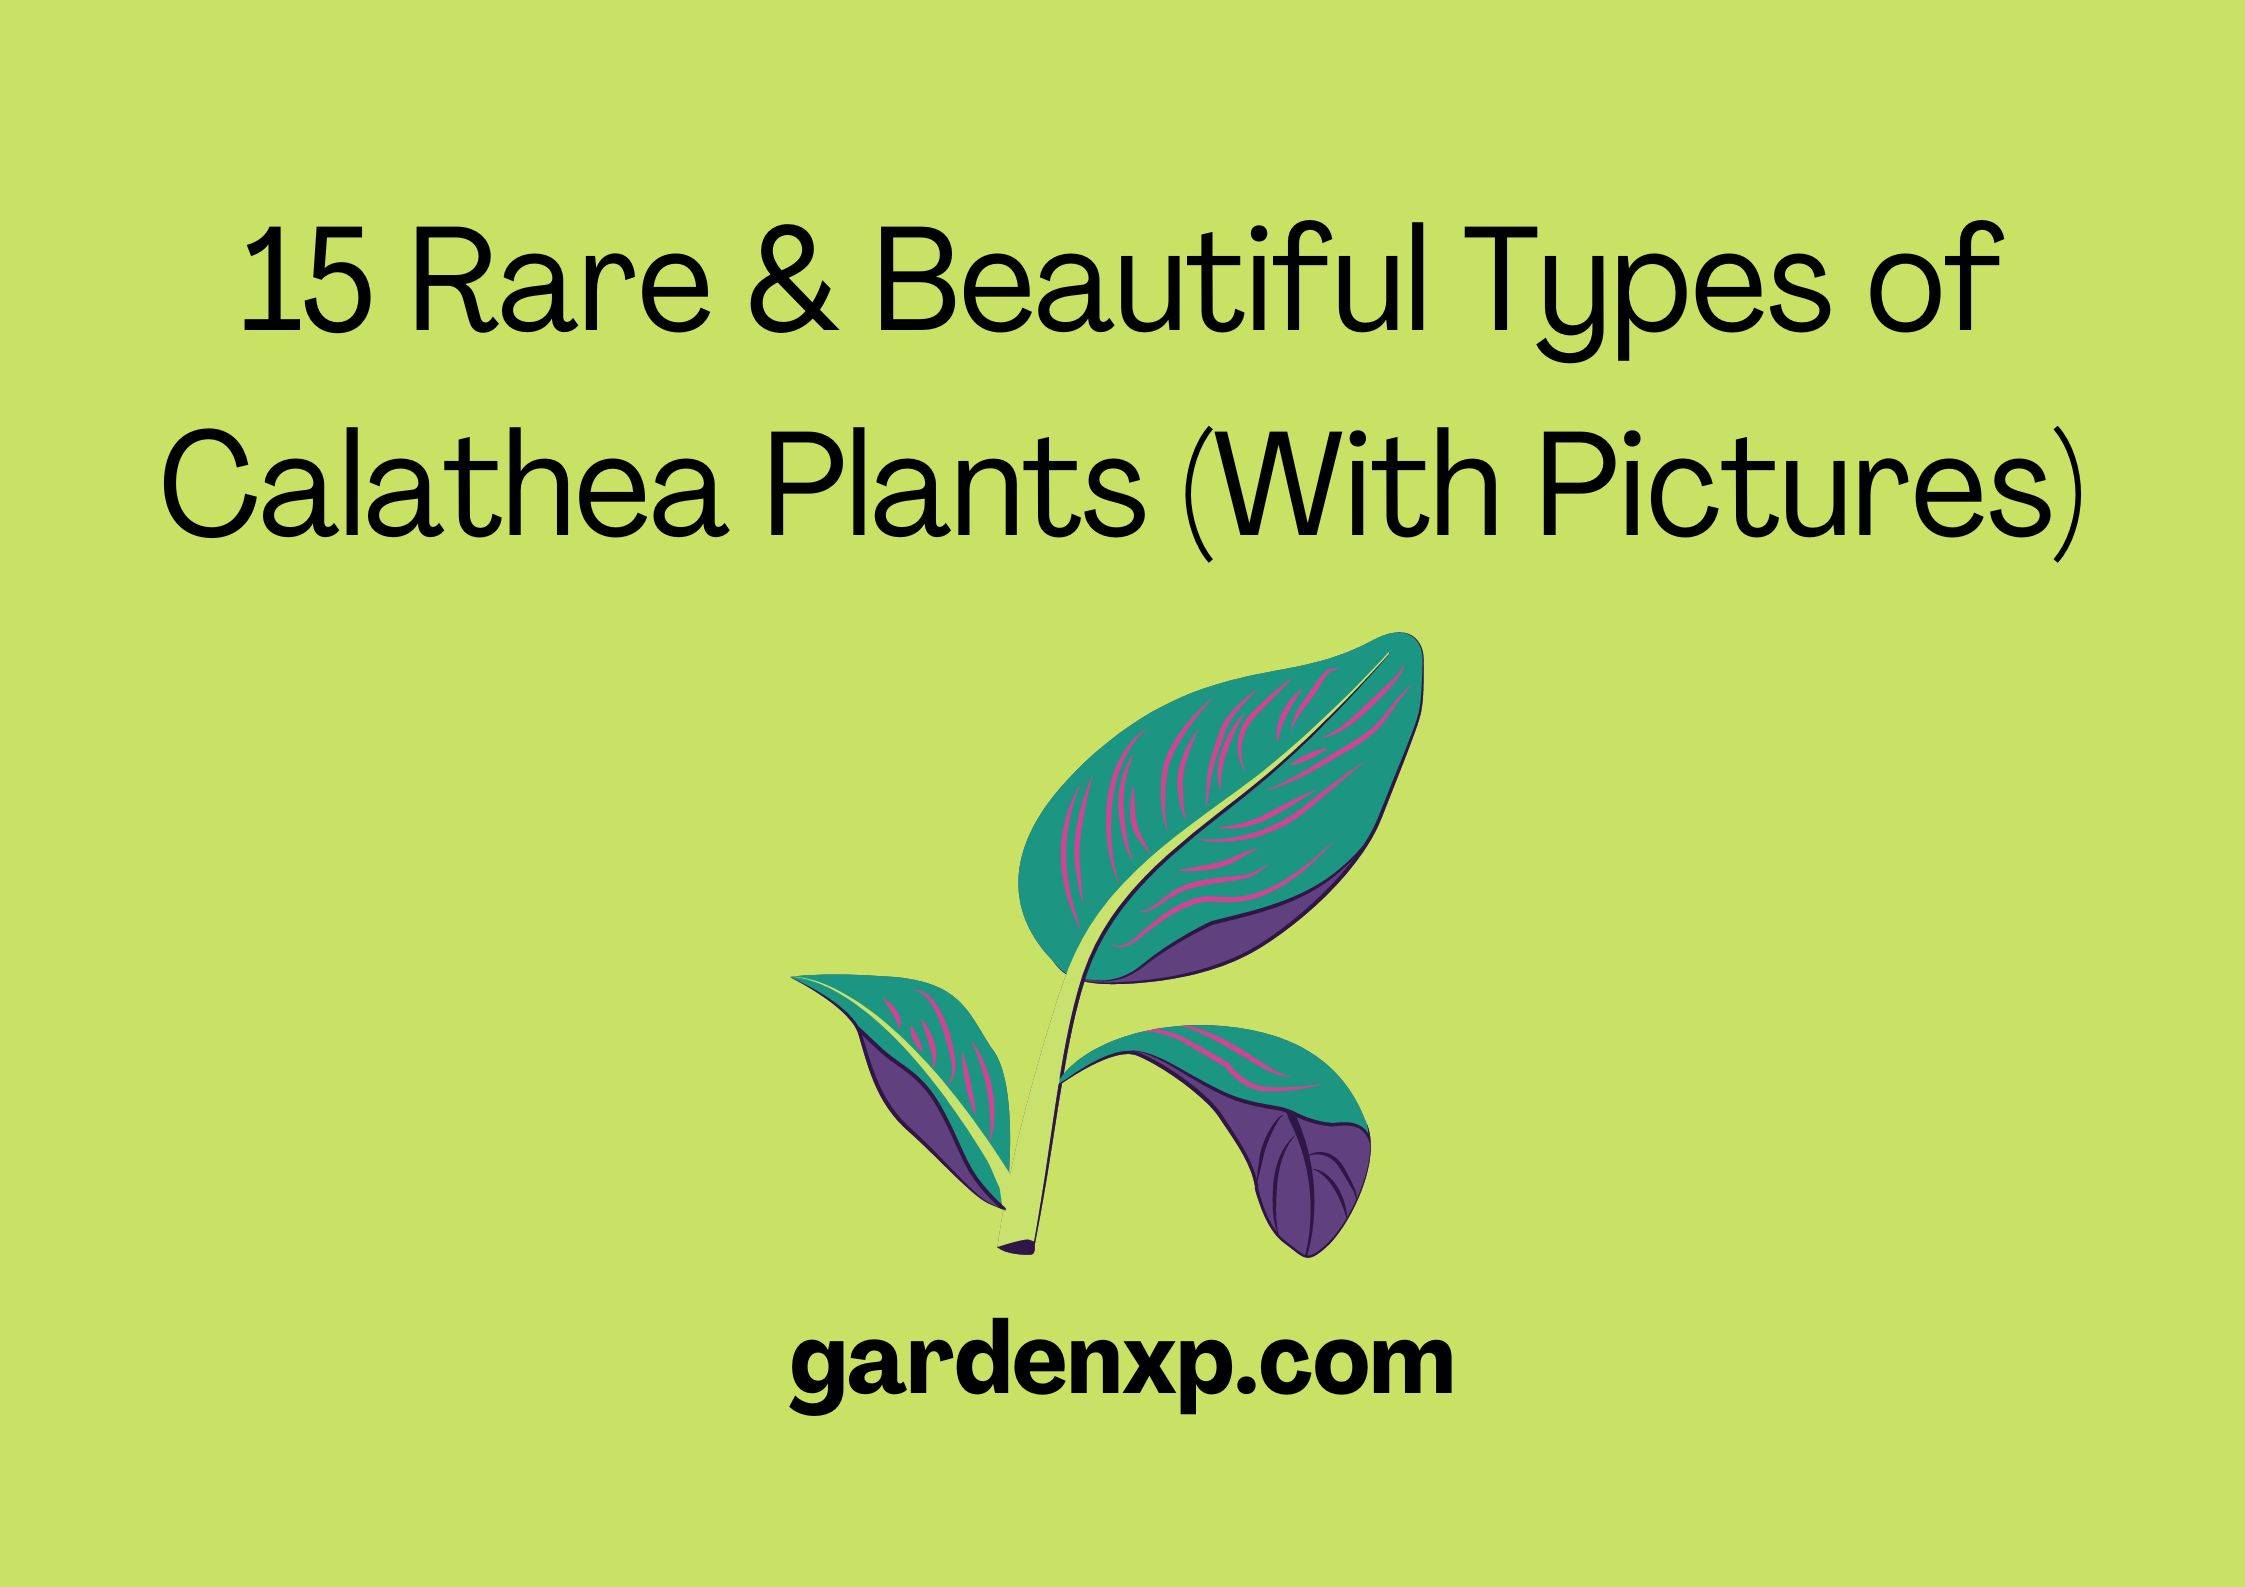 15 Rare & Beautiful Types of Calathea Plants (With Pictures)